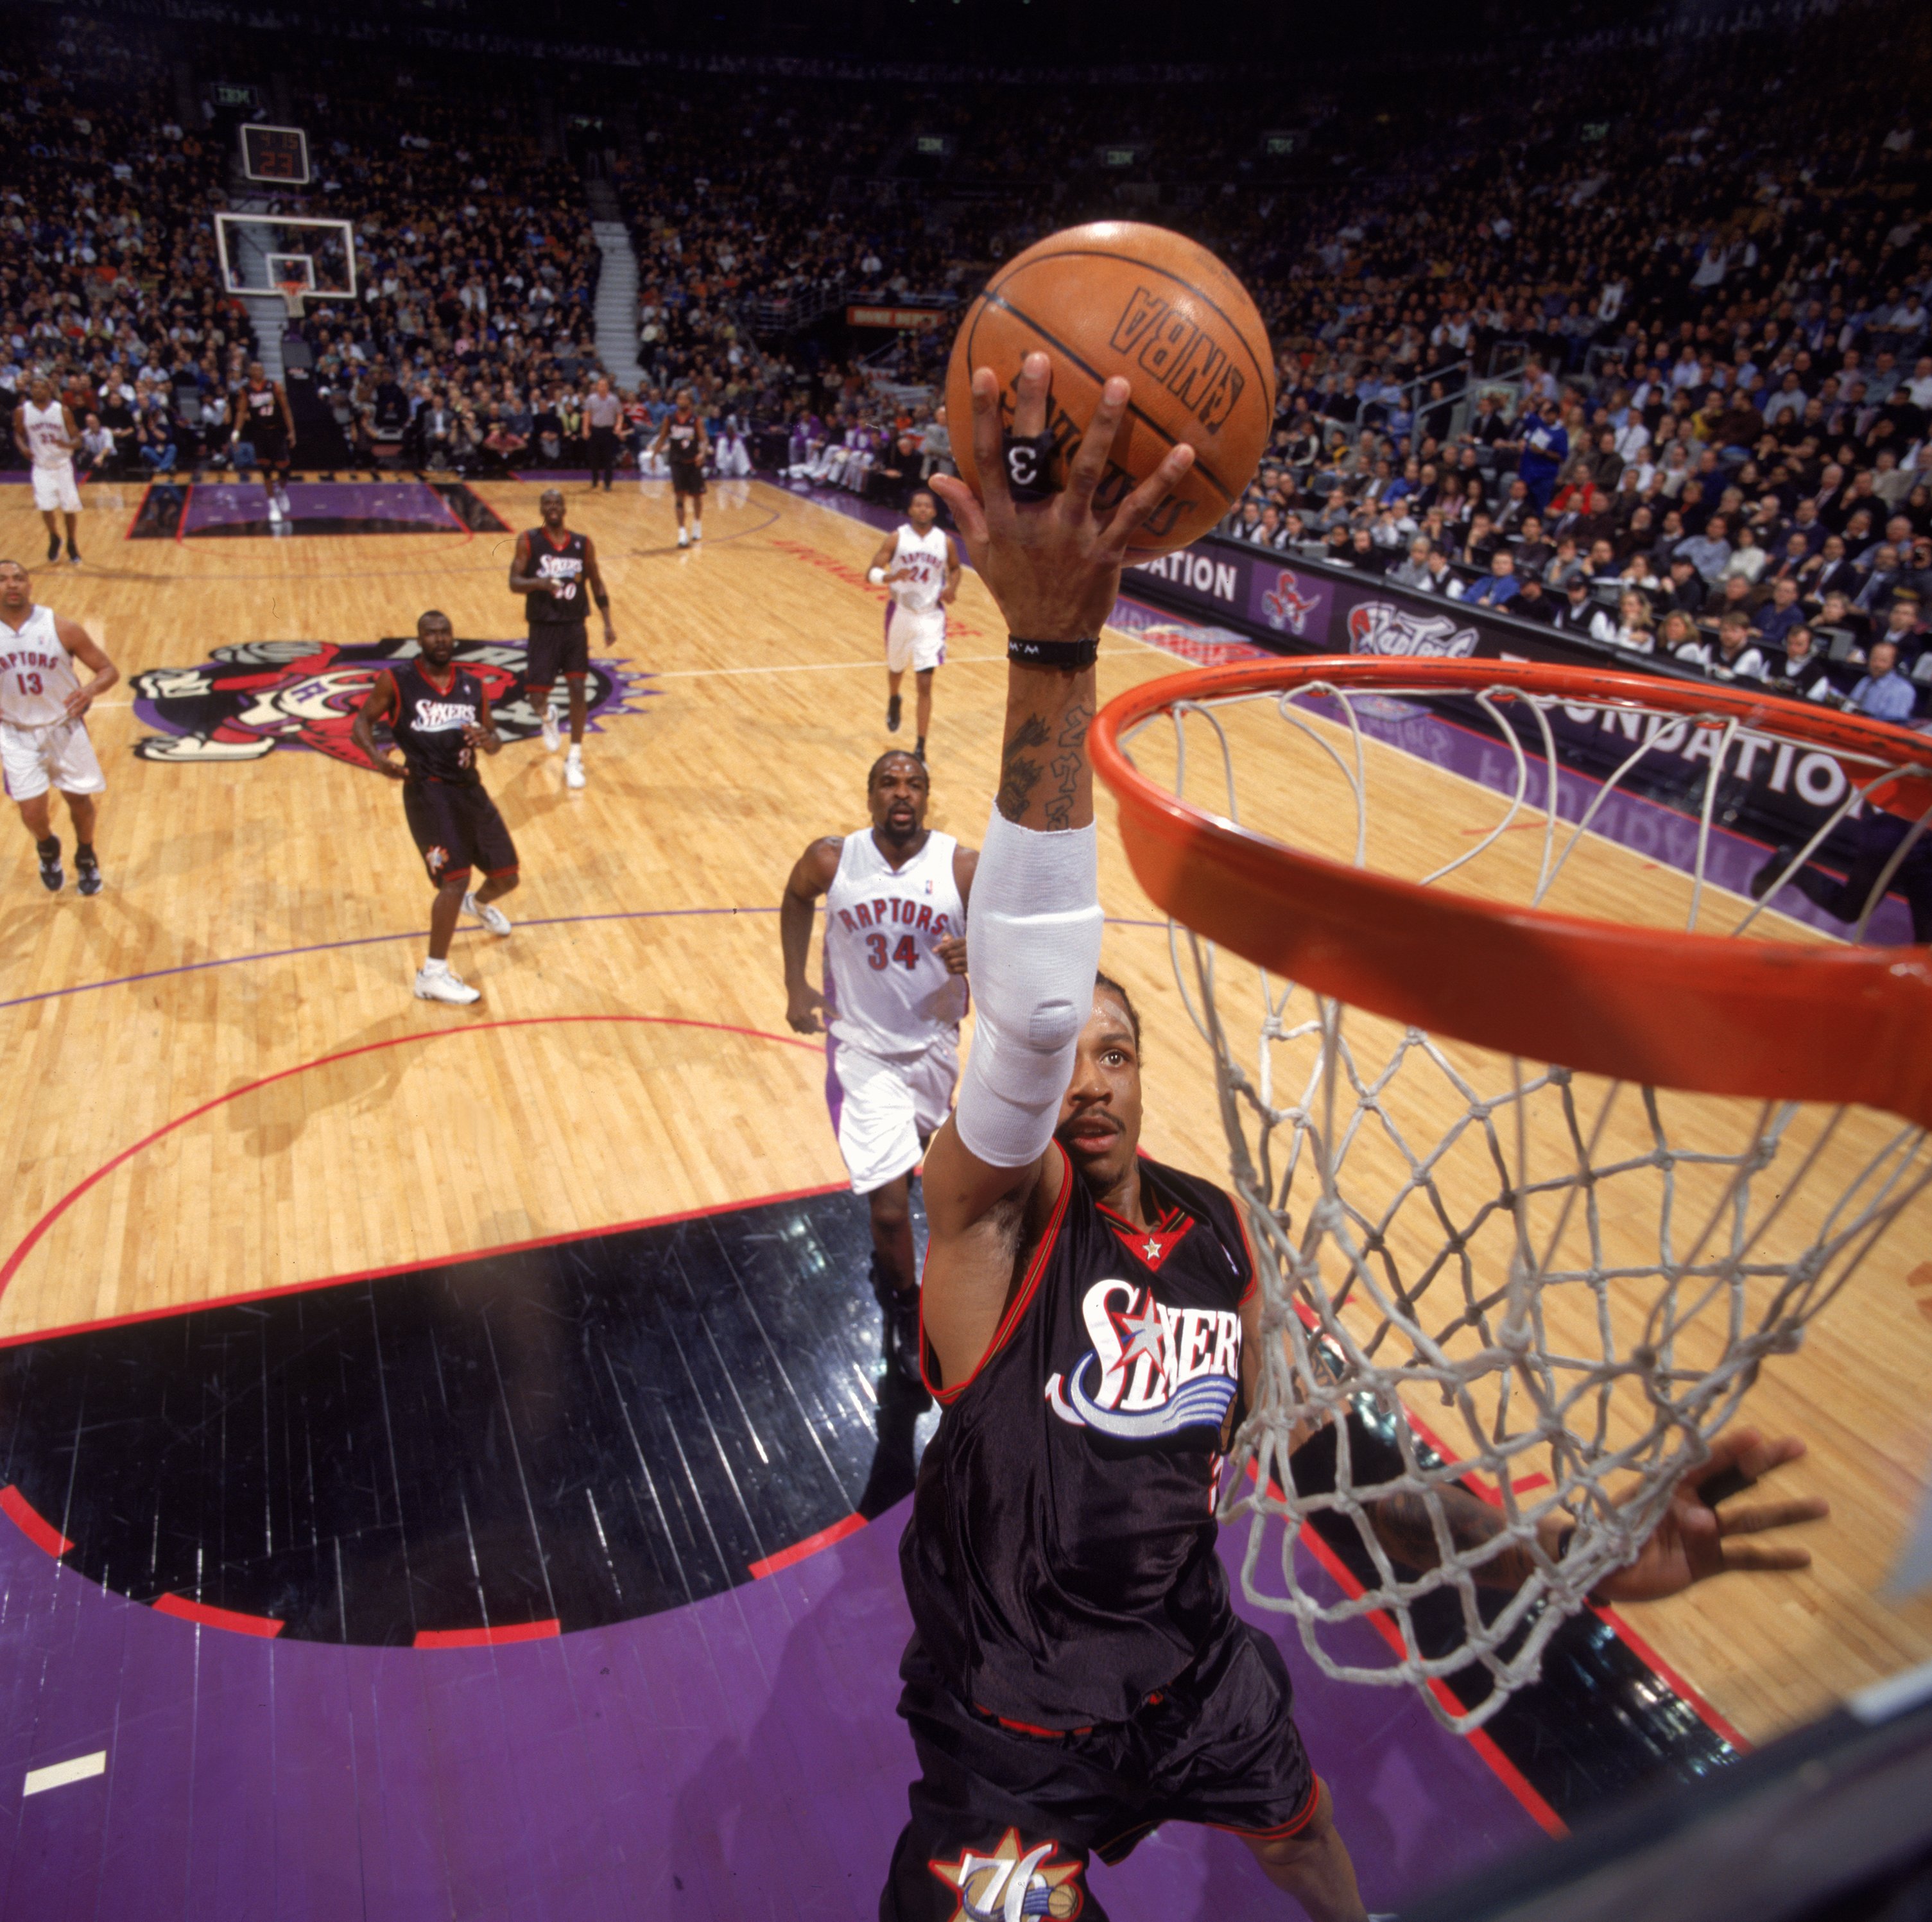 29 Jan 2001:  Allen Iverson #5 of Philadelphia 76ers jumps up to dunk the ball during the game against the Toronto Raptors at the Air Canada Centre in Toronto, Canada. The Raptors defeated the 76ers 96-89.  NOTE TO USER: It is expressly understood that th